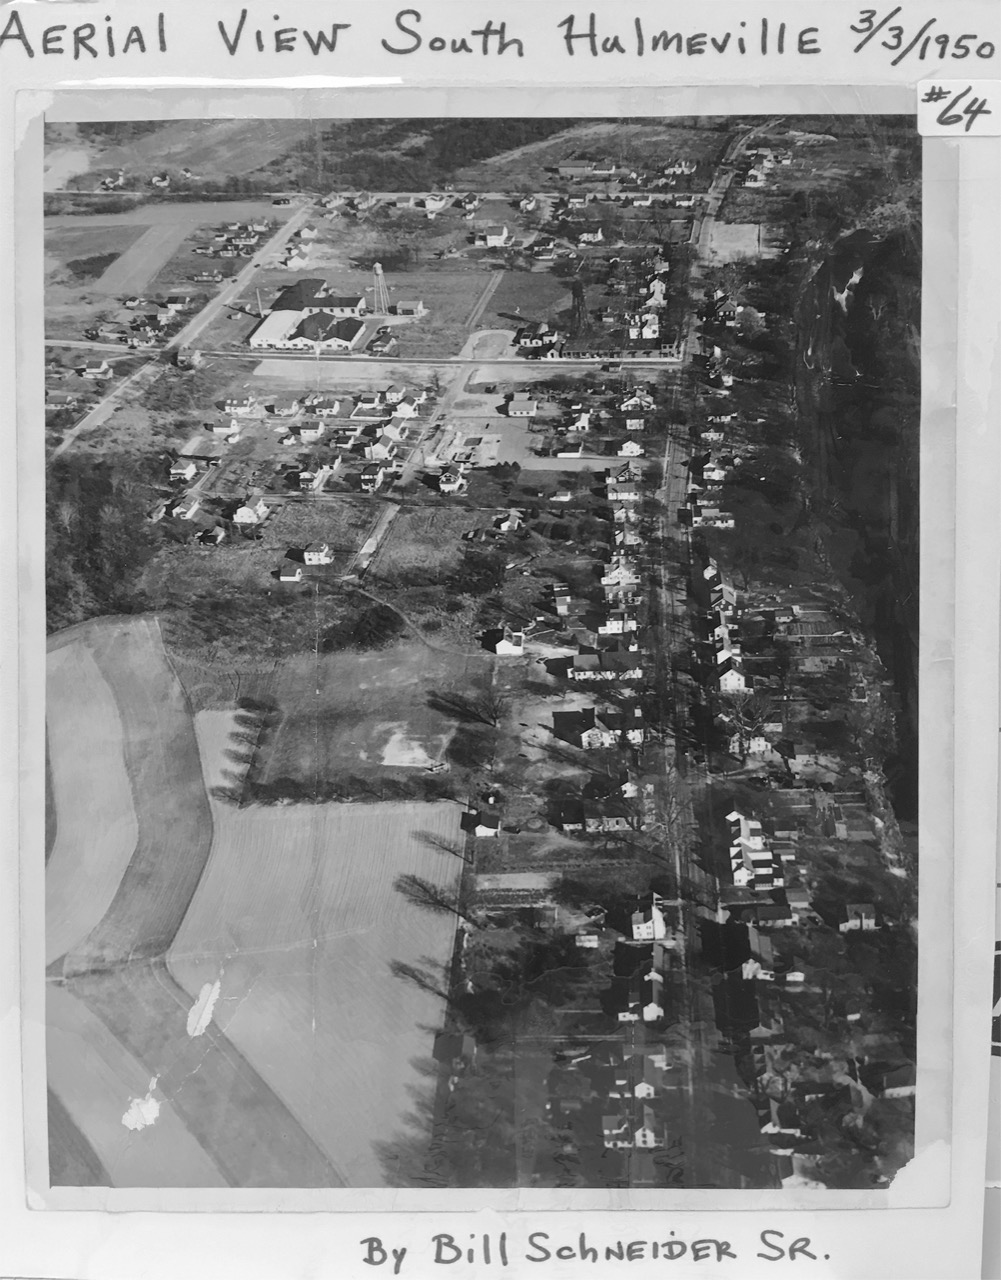 Aerial photo of Hulmeville, March 1950